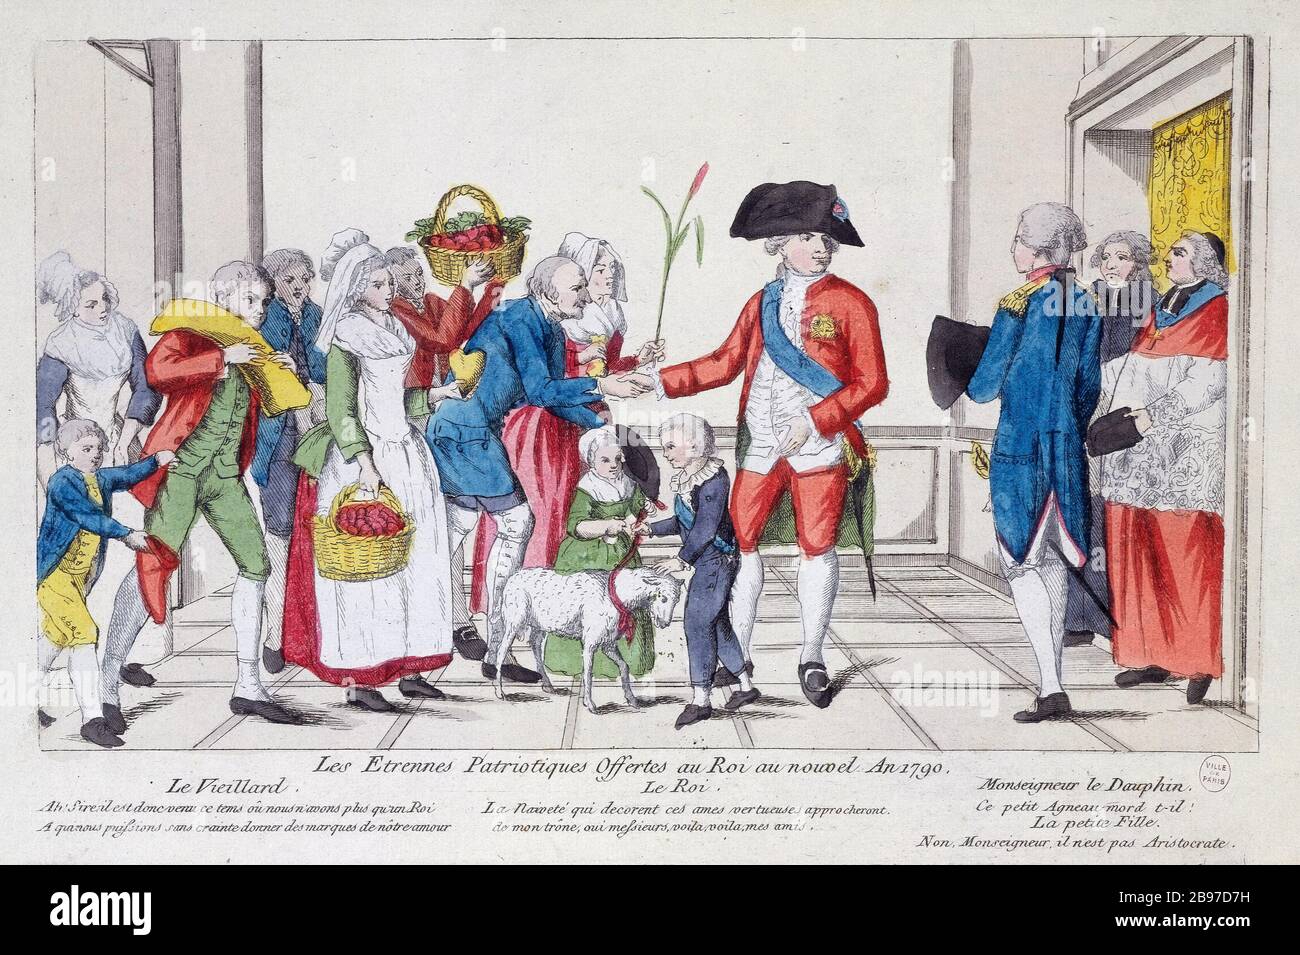 New Year gifts PATRIOTIC OFFERED TO THE KING IN NEW YEAR 1790 'Les Etrennes Patriotiques offertes au Roi au nouvel an 1790'. Estampe. Paris, musée Carnavalet. Stock Photo